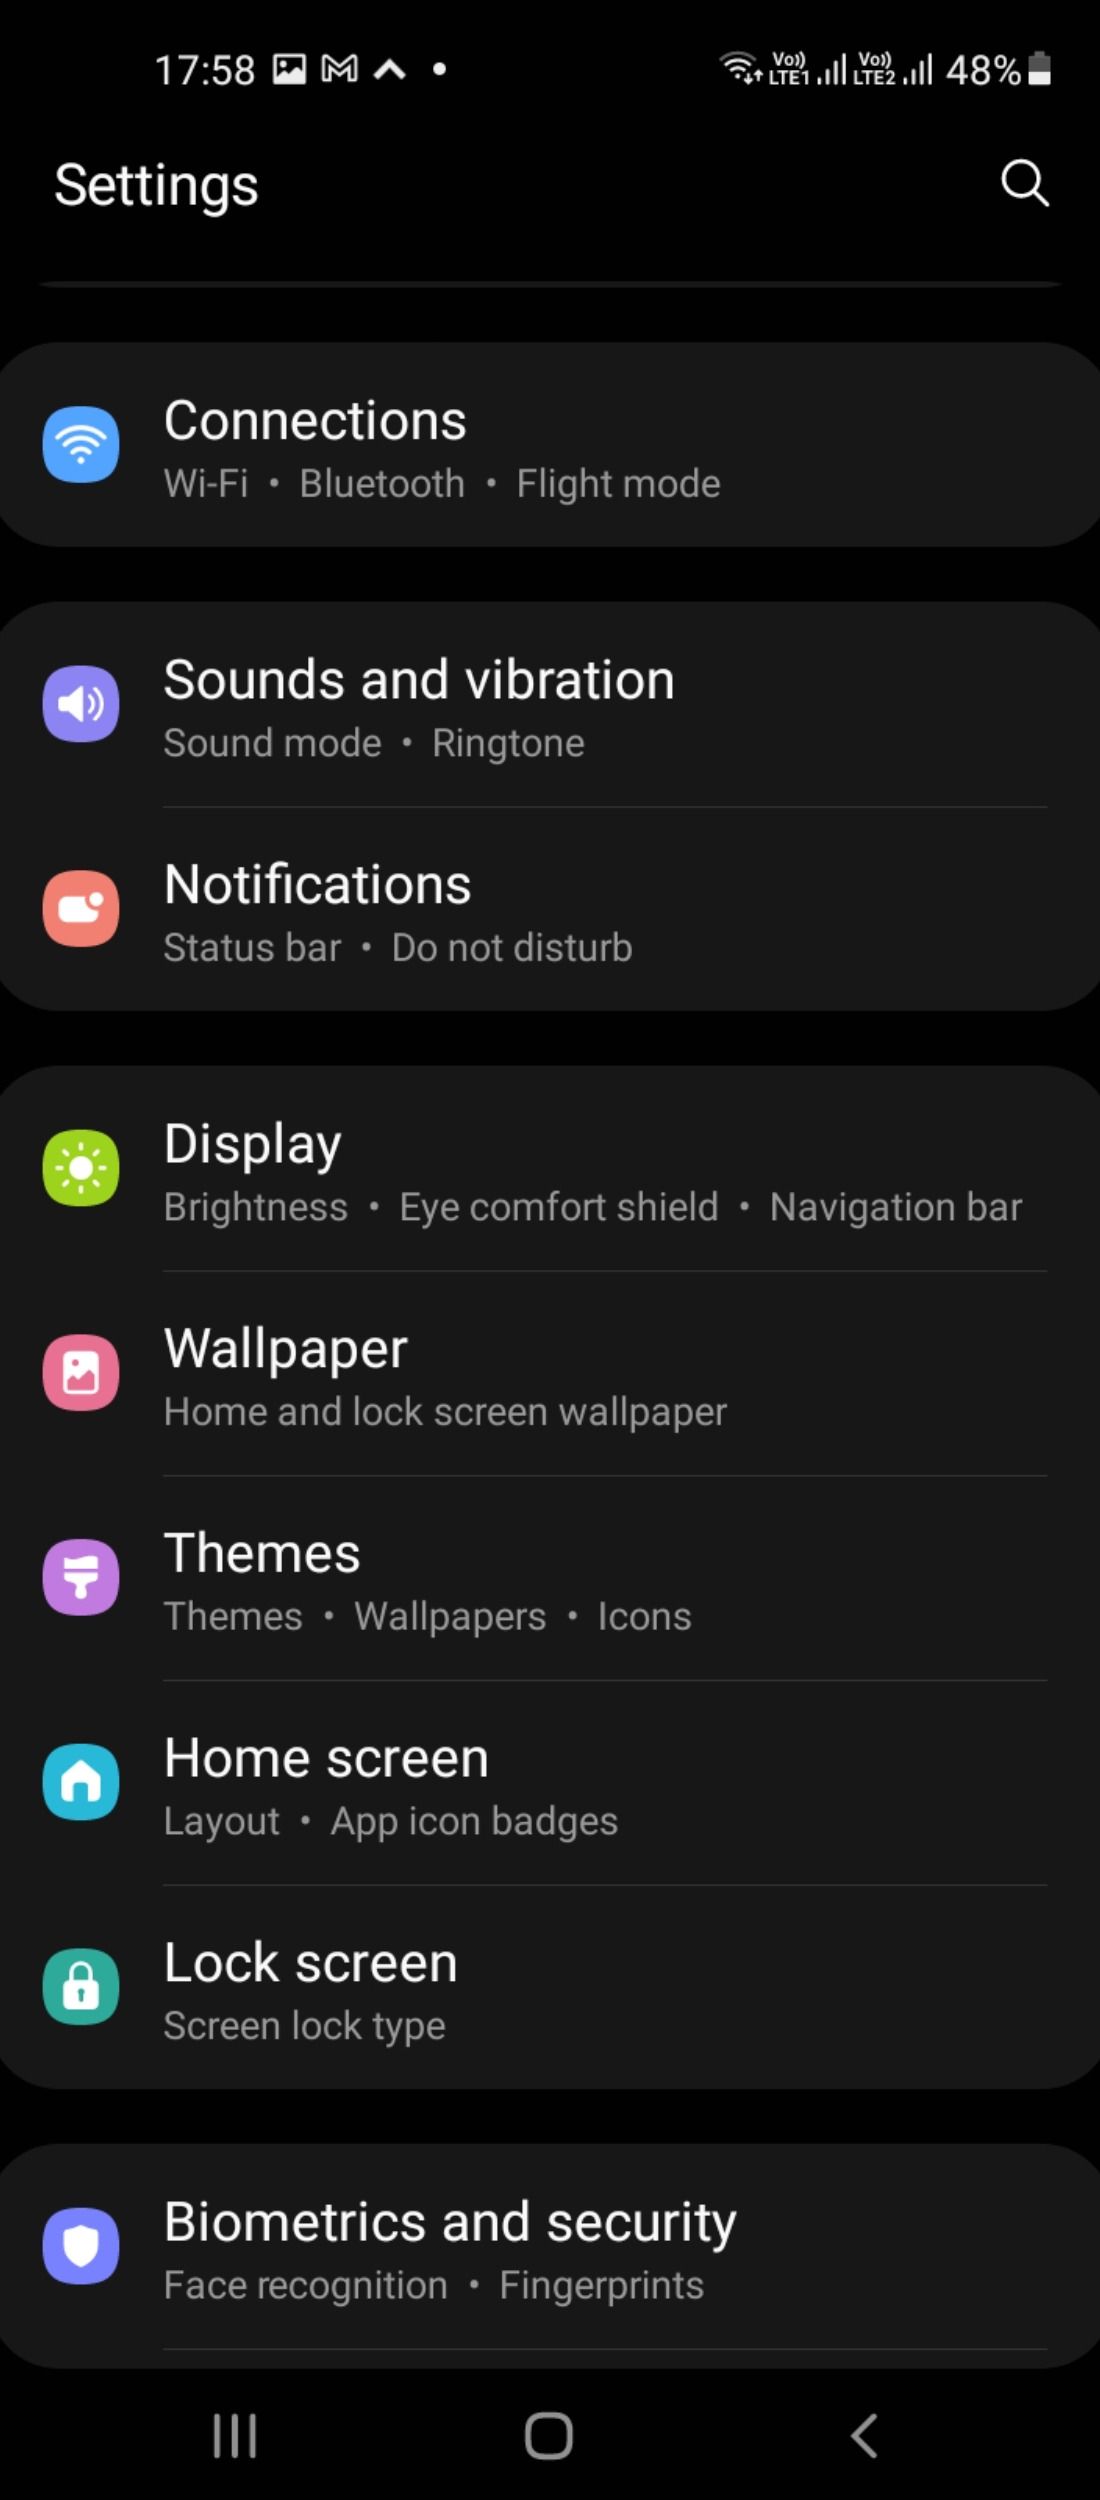 Connections settings for Samsung